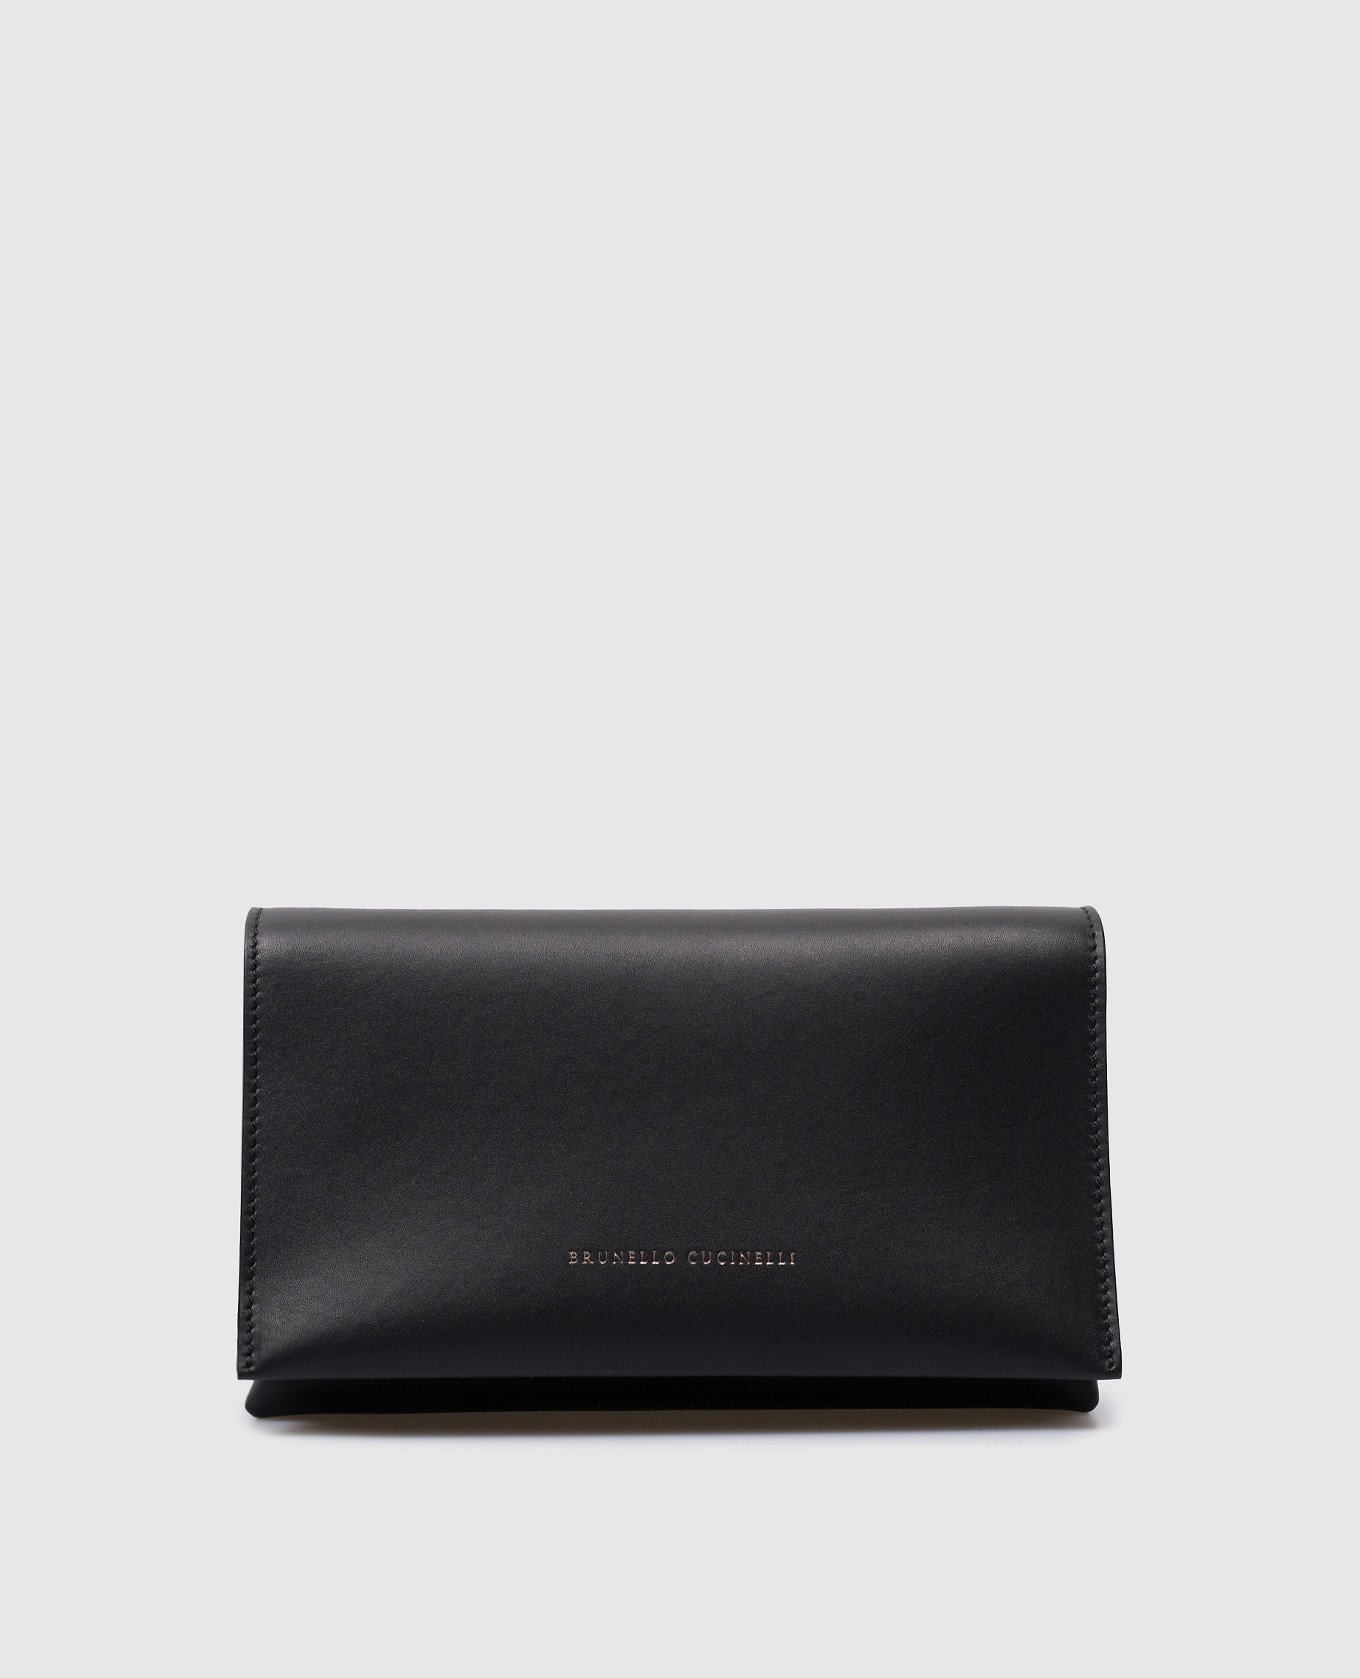 Black leather clutch with logo